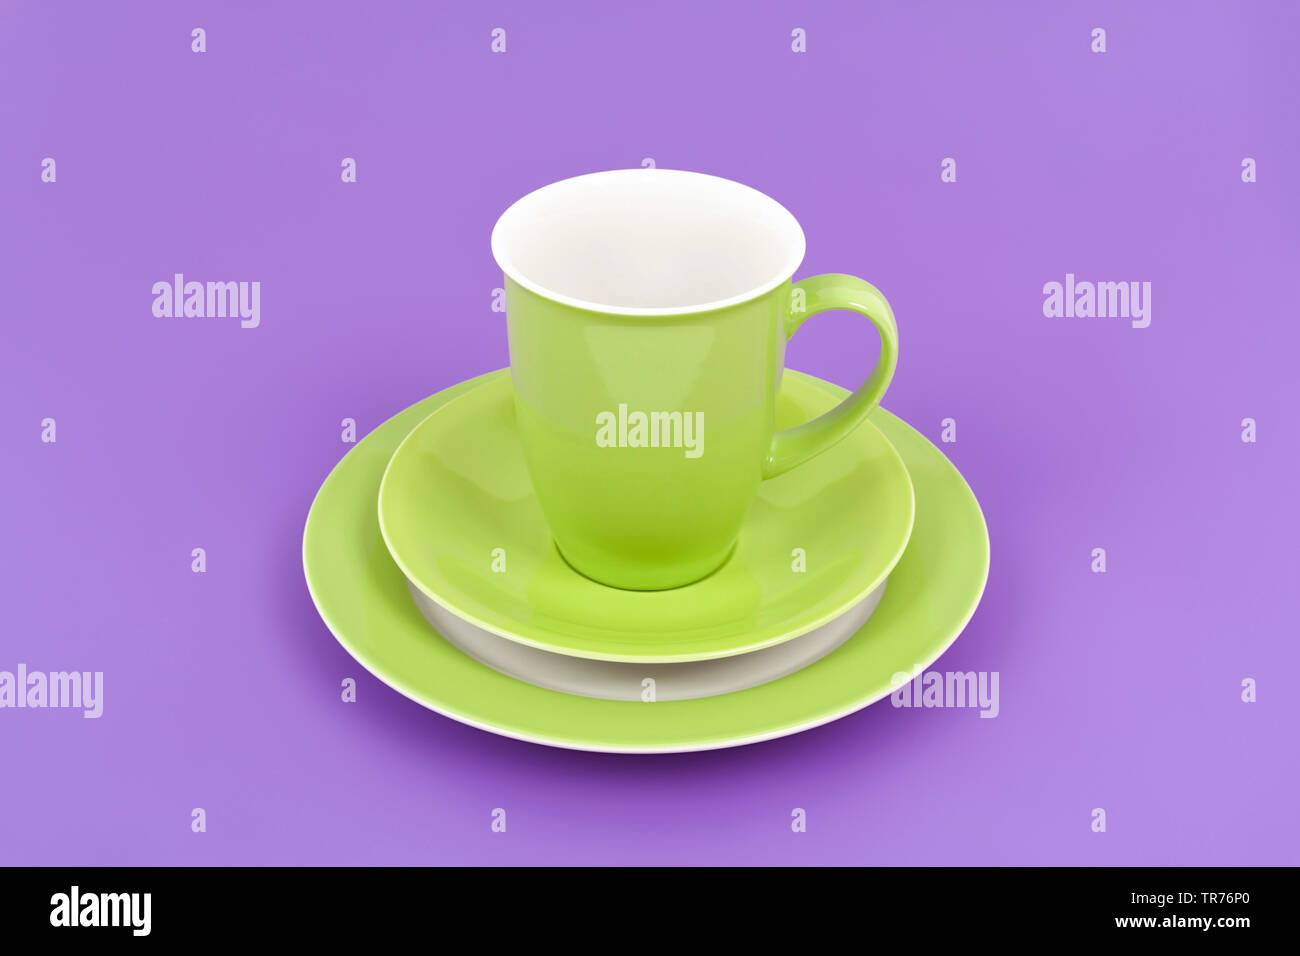 https://c8.alamy.com/comp/TR76P0/green-coffee-cup-on-purple-background-against-violet-background-TR76P0.jpg